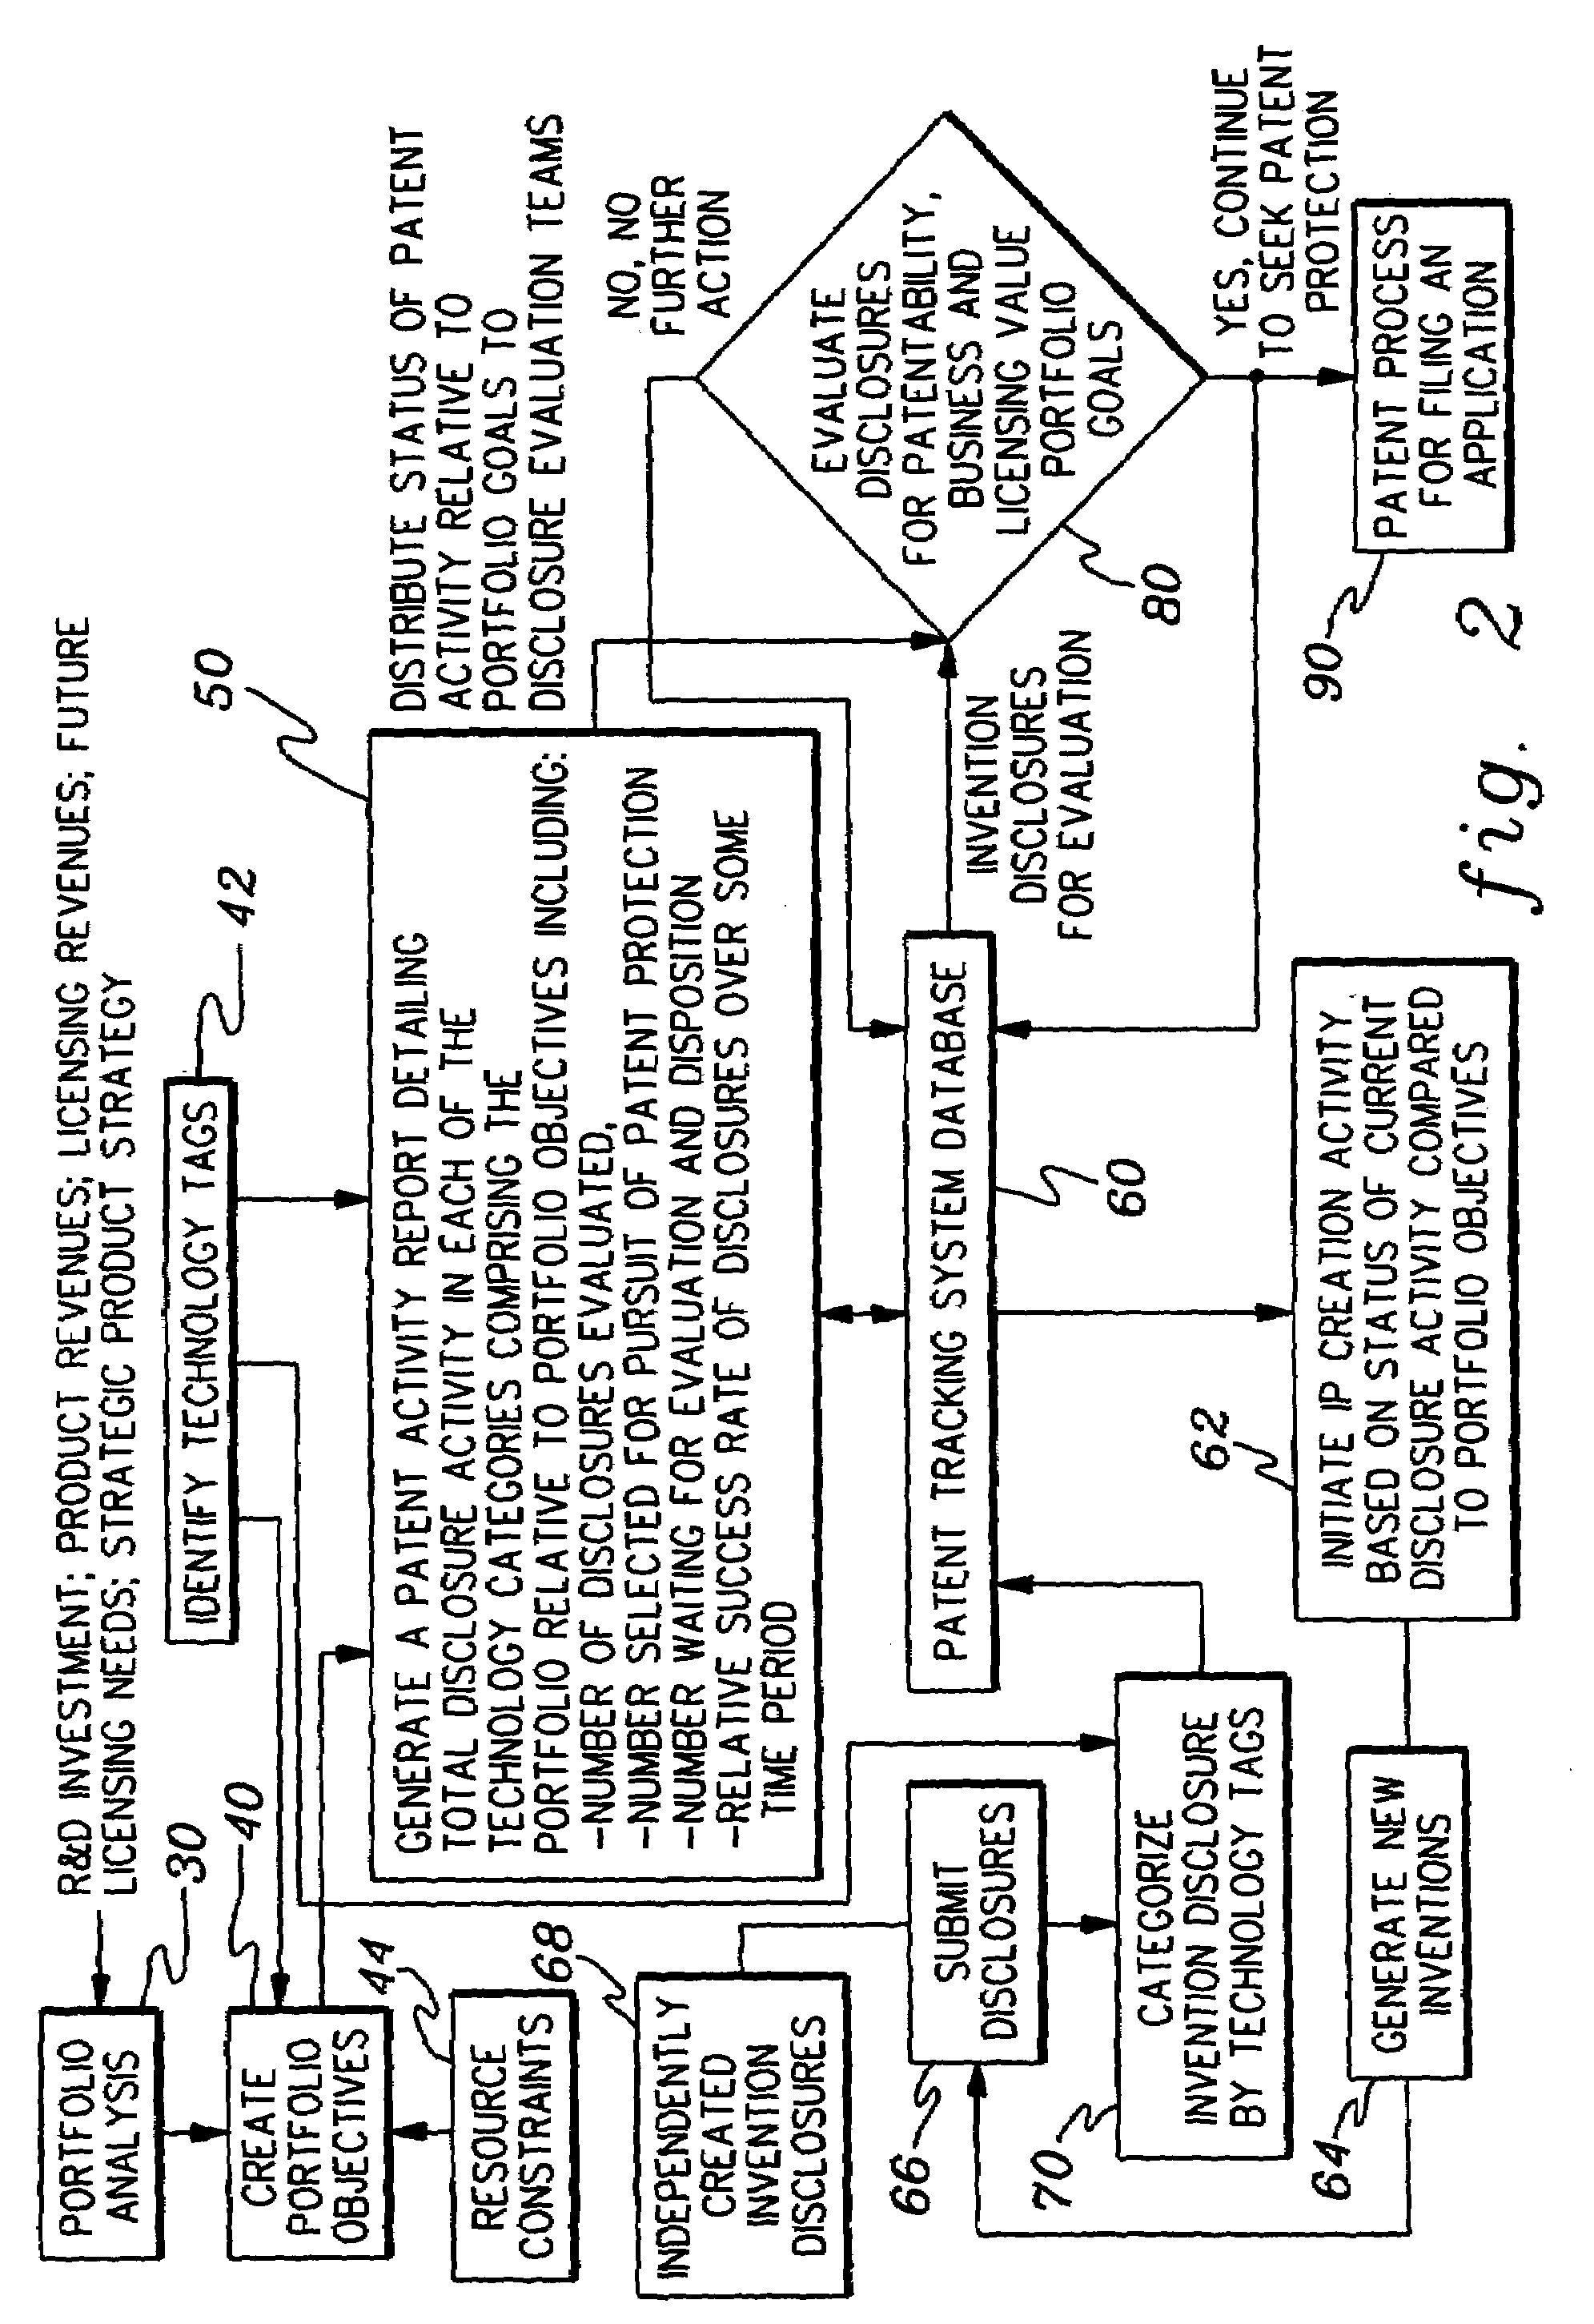 Intellectual property management method and apparatus